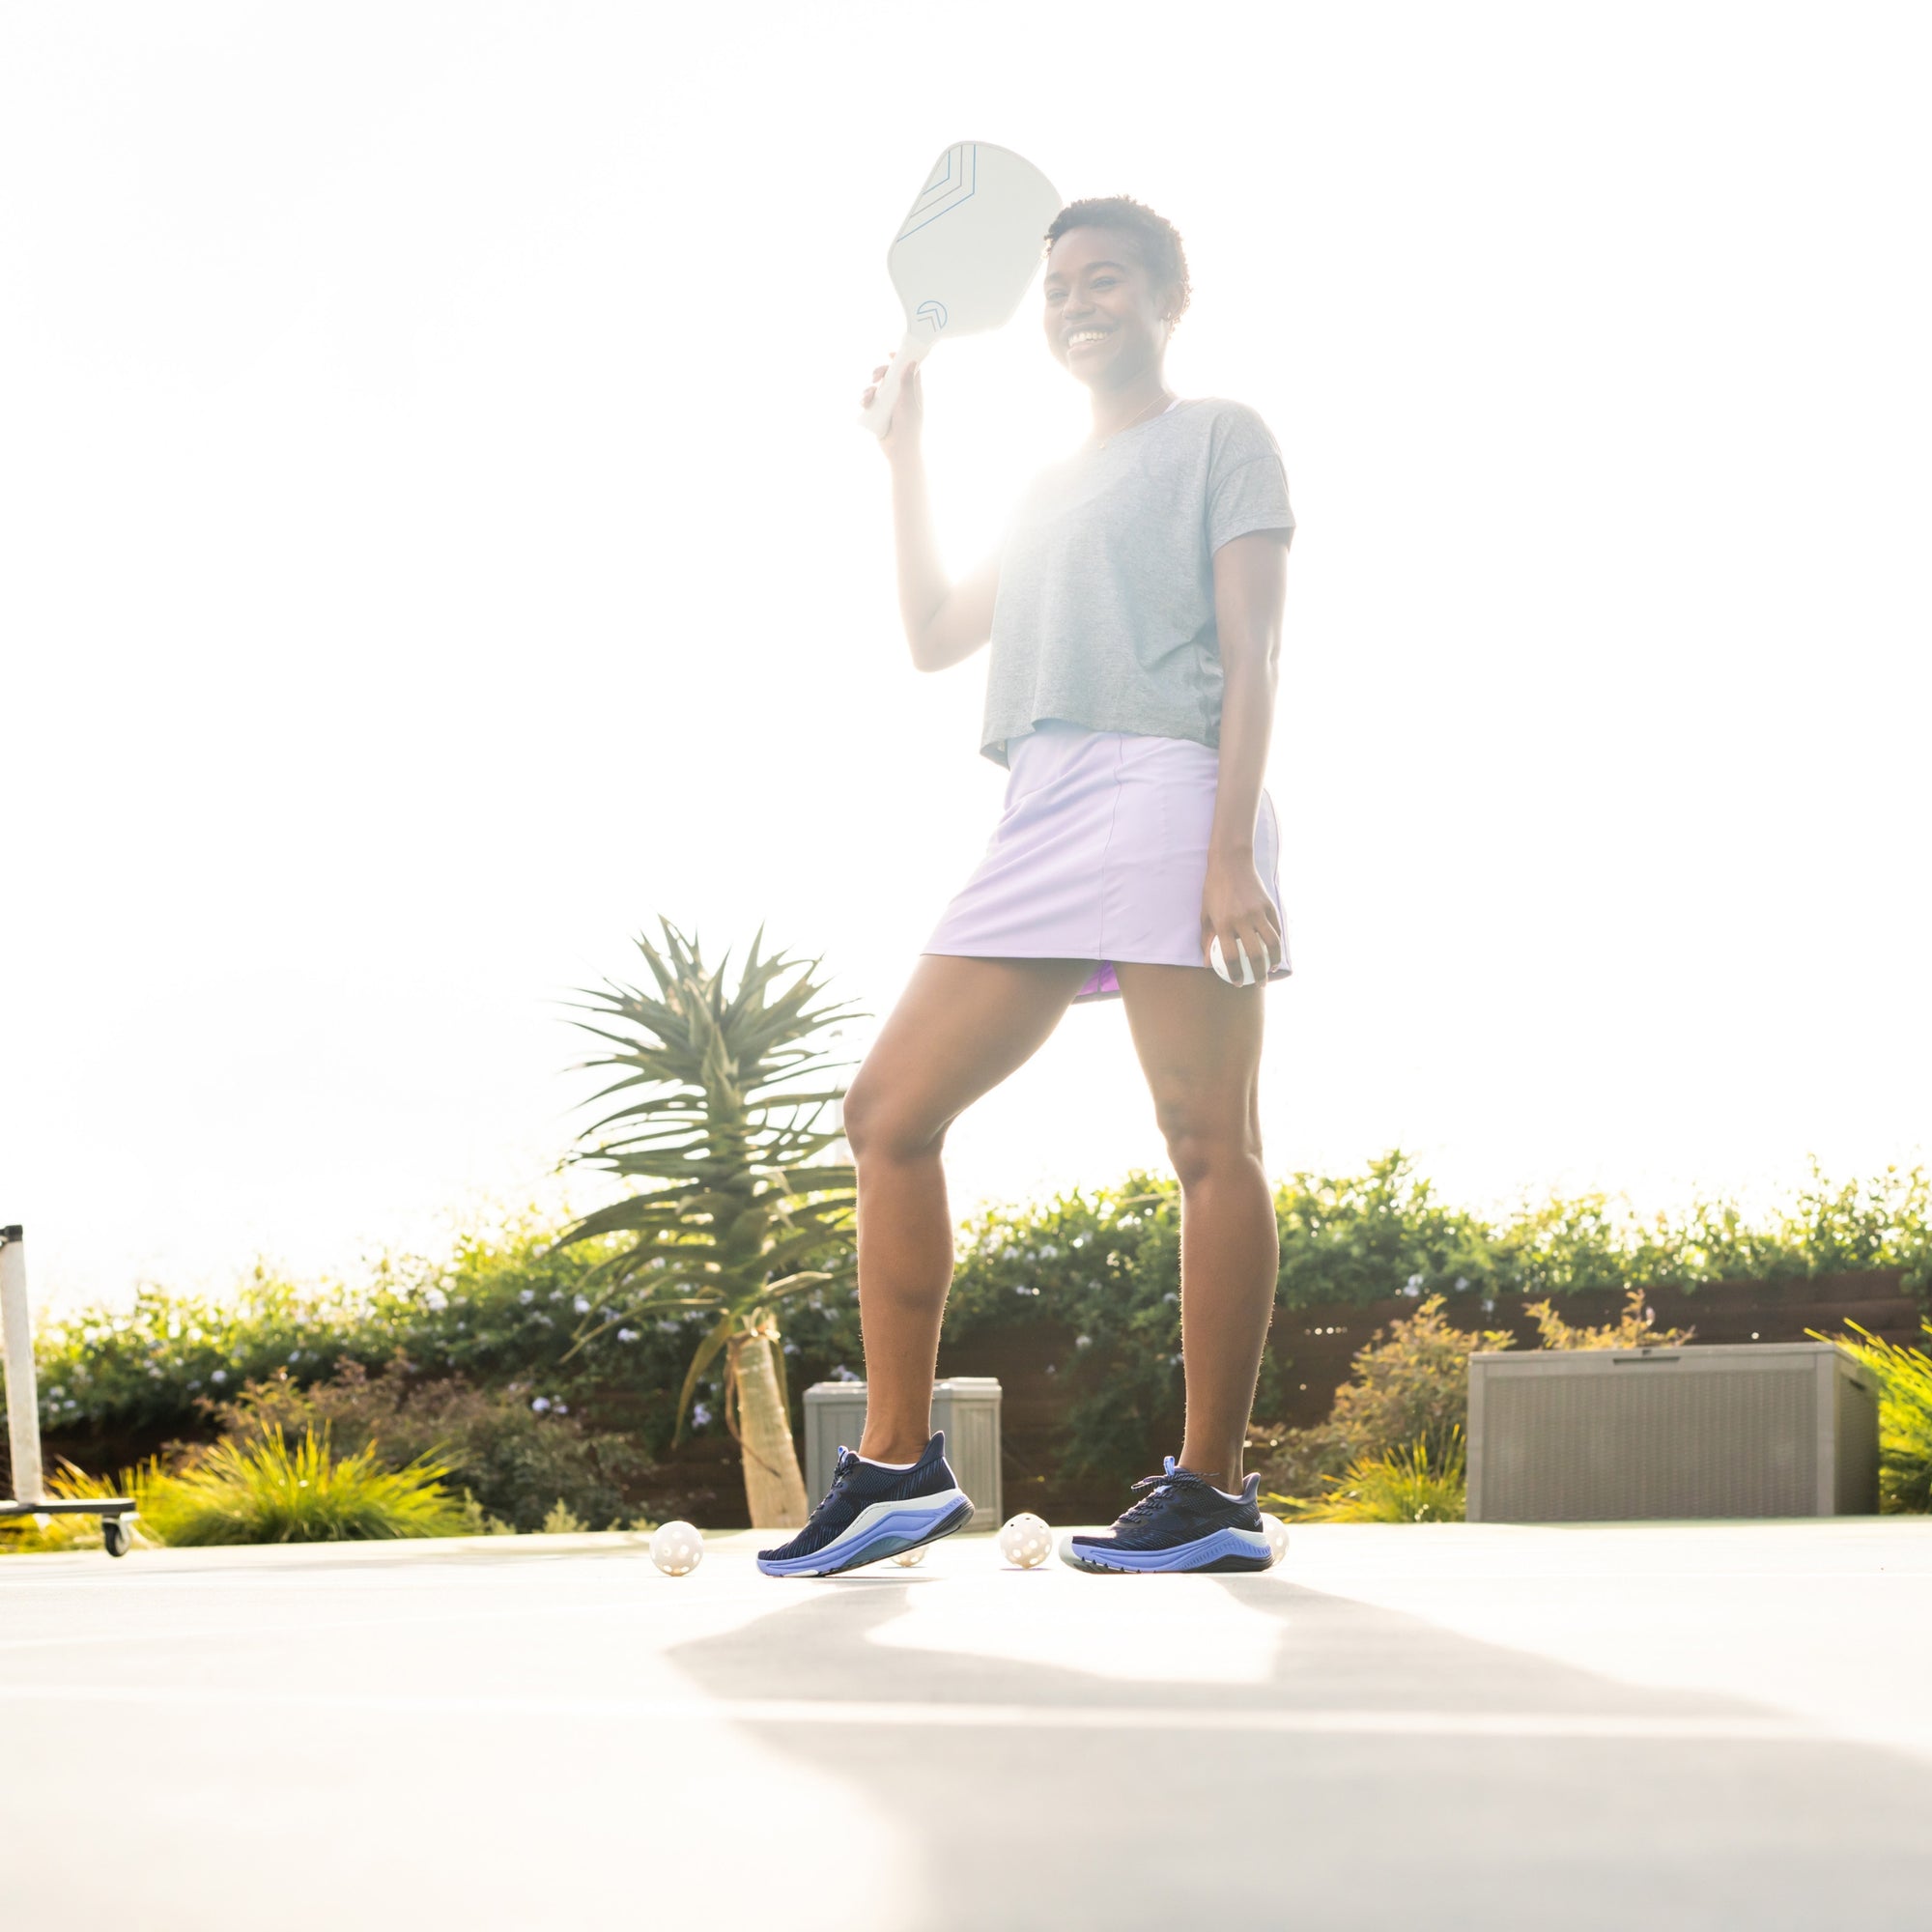 A woman playing pickleball in stylish activewear and navy blue active sneakers. 